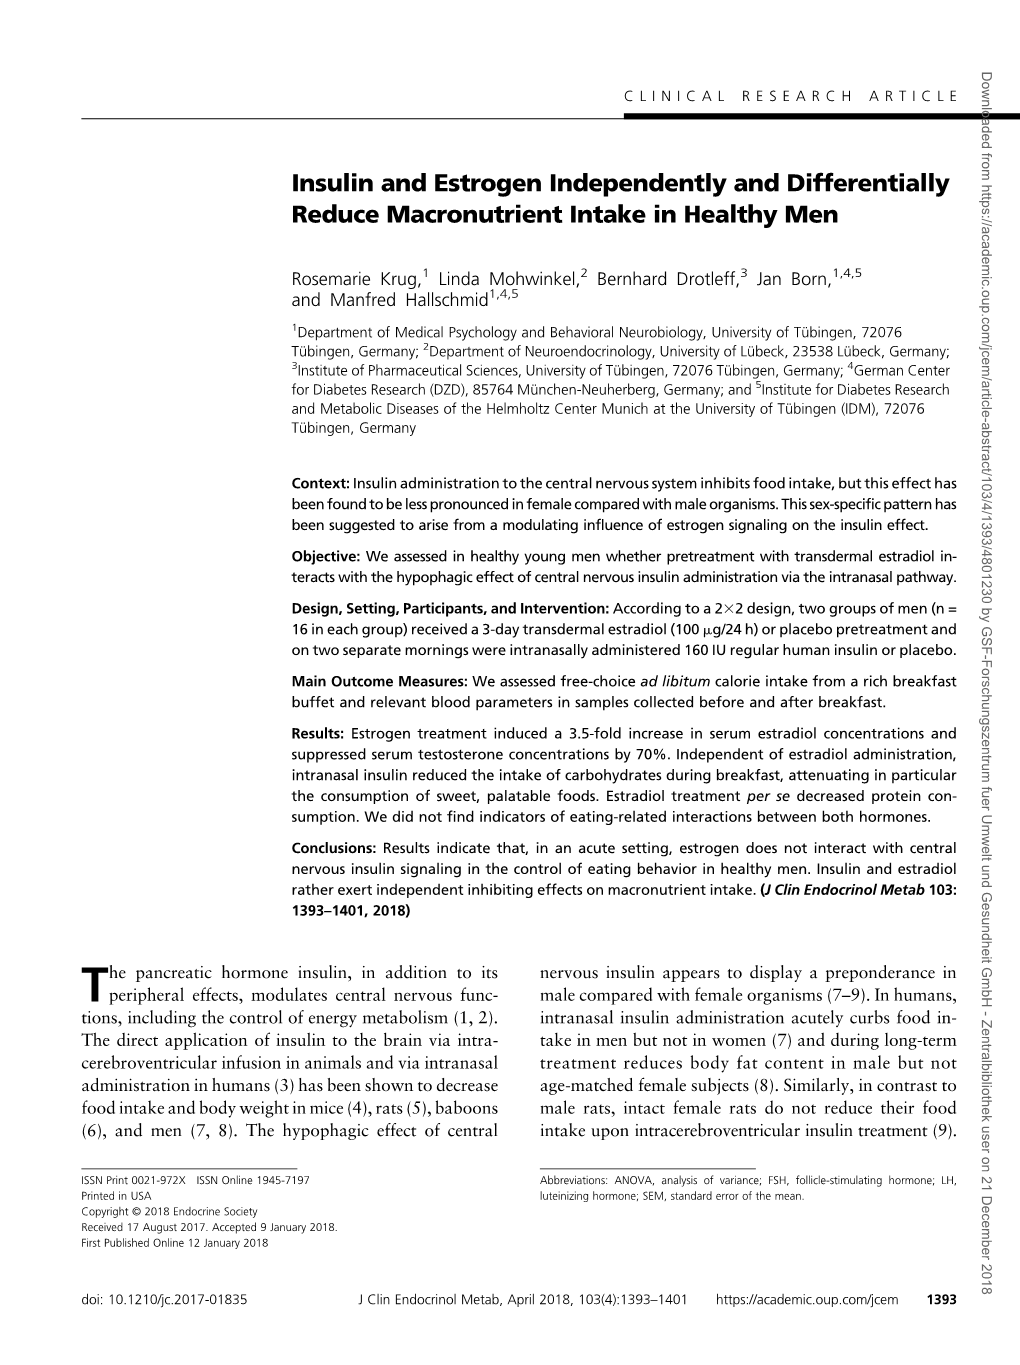 Insulin and Estrogen Independently and Differentially Reduce Macronutrient Intake in Healthy Men